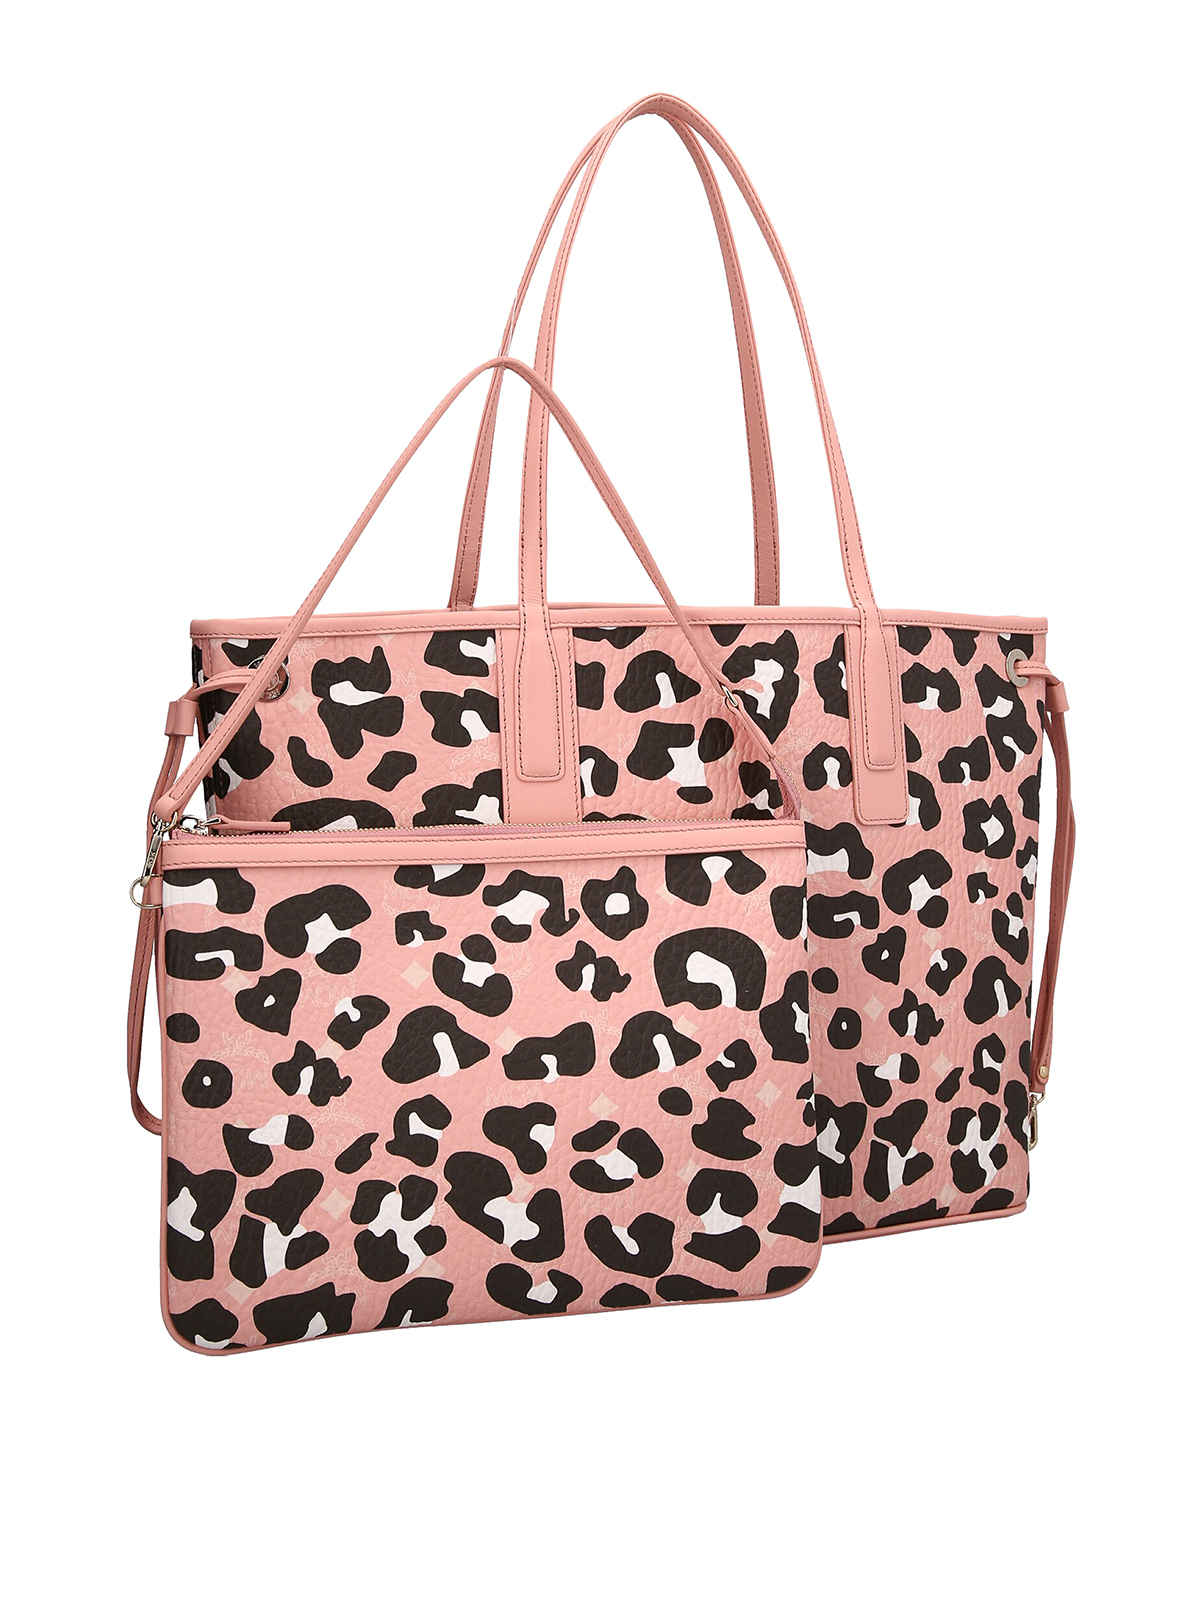 Taylor Gray Neoprene Bags- Michelle Large Tote - The Lodge at Gulf State  Park